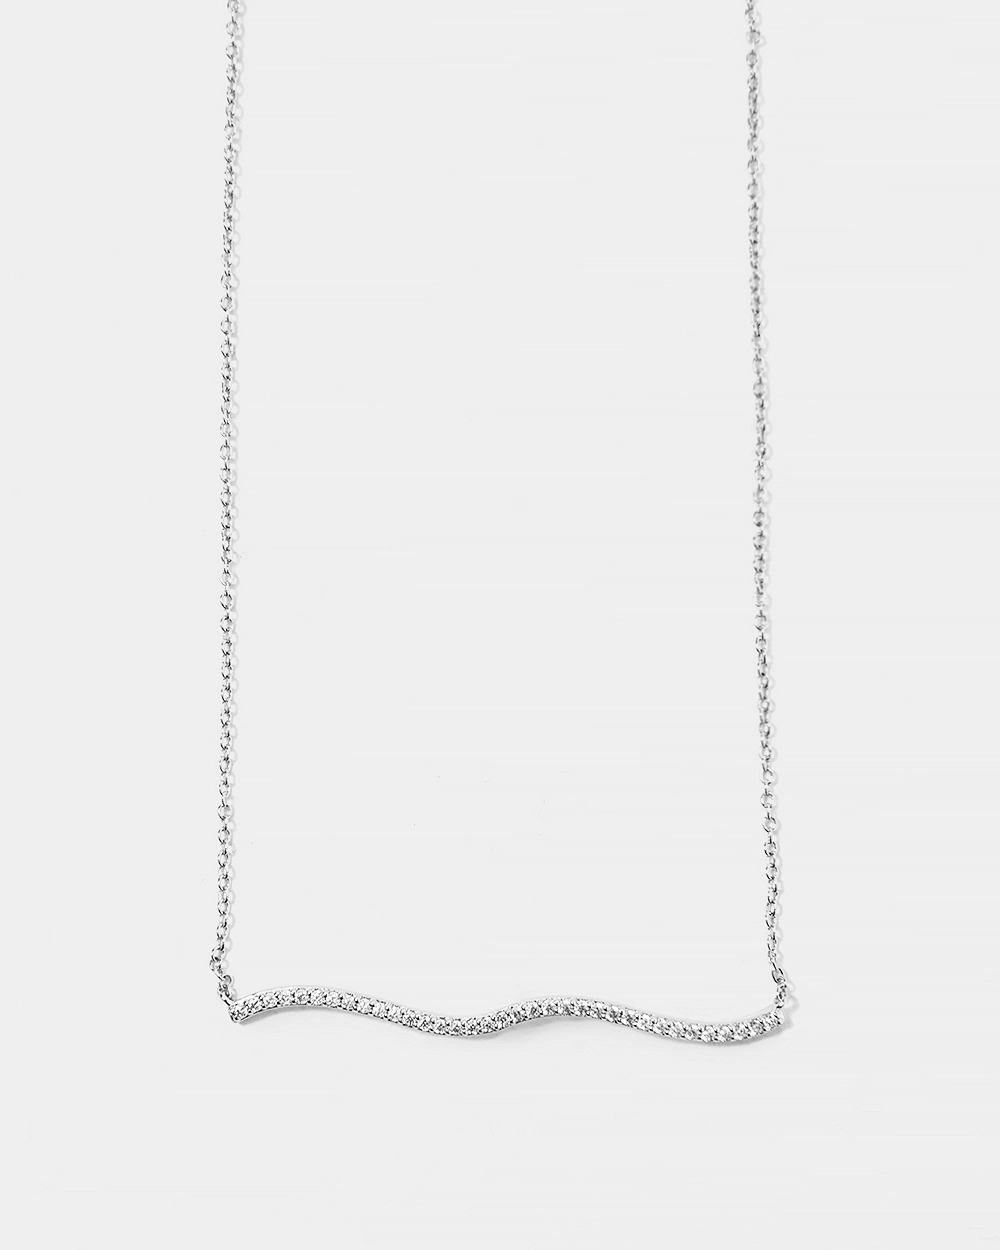 Kaylee Silver Necklace